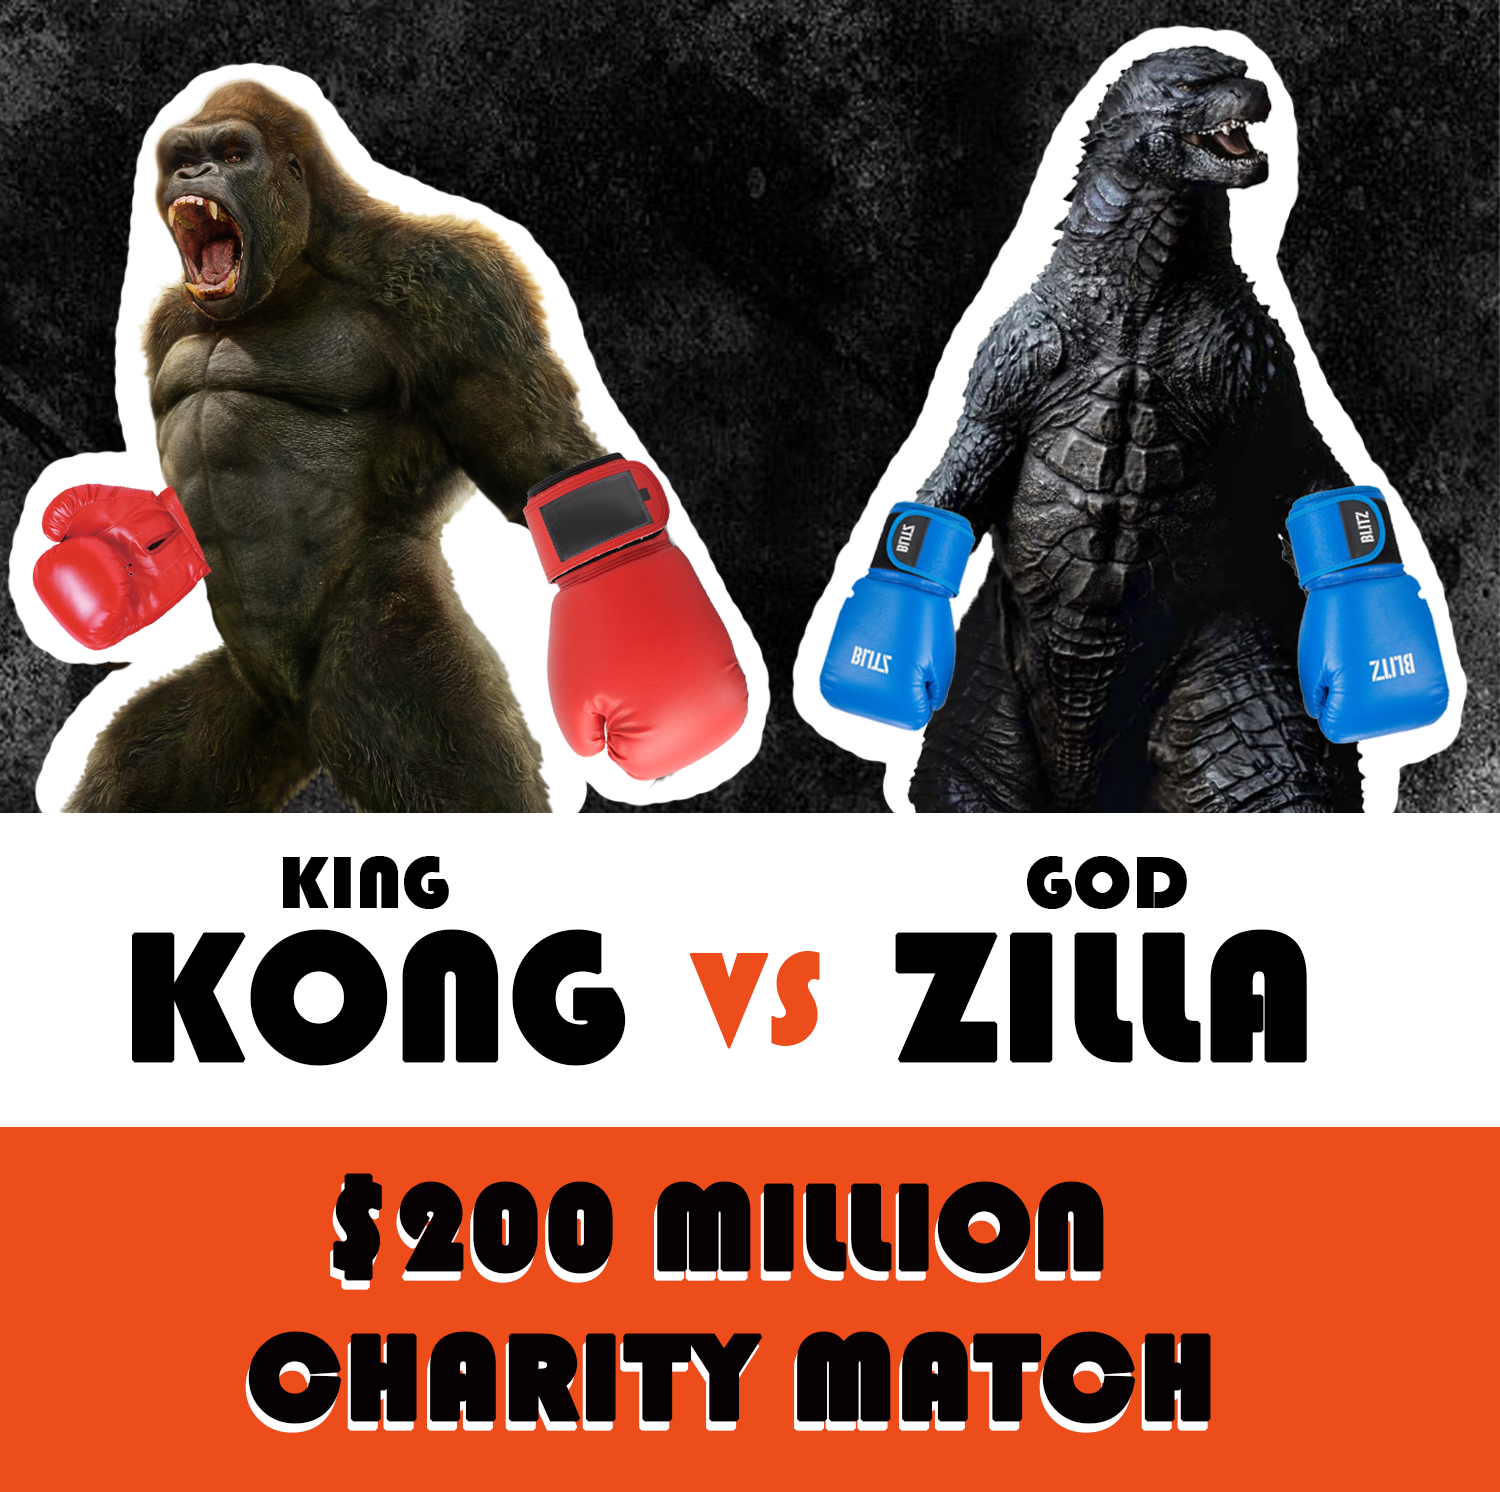 A flyer for the Godzilla vs. Kong charity boxing match.